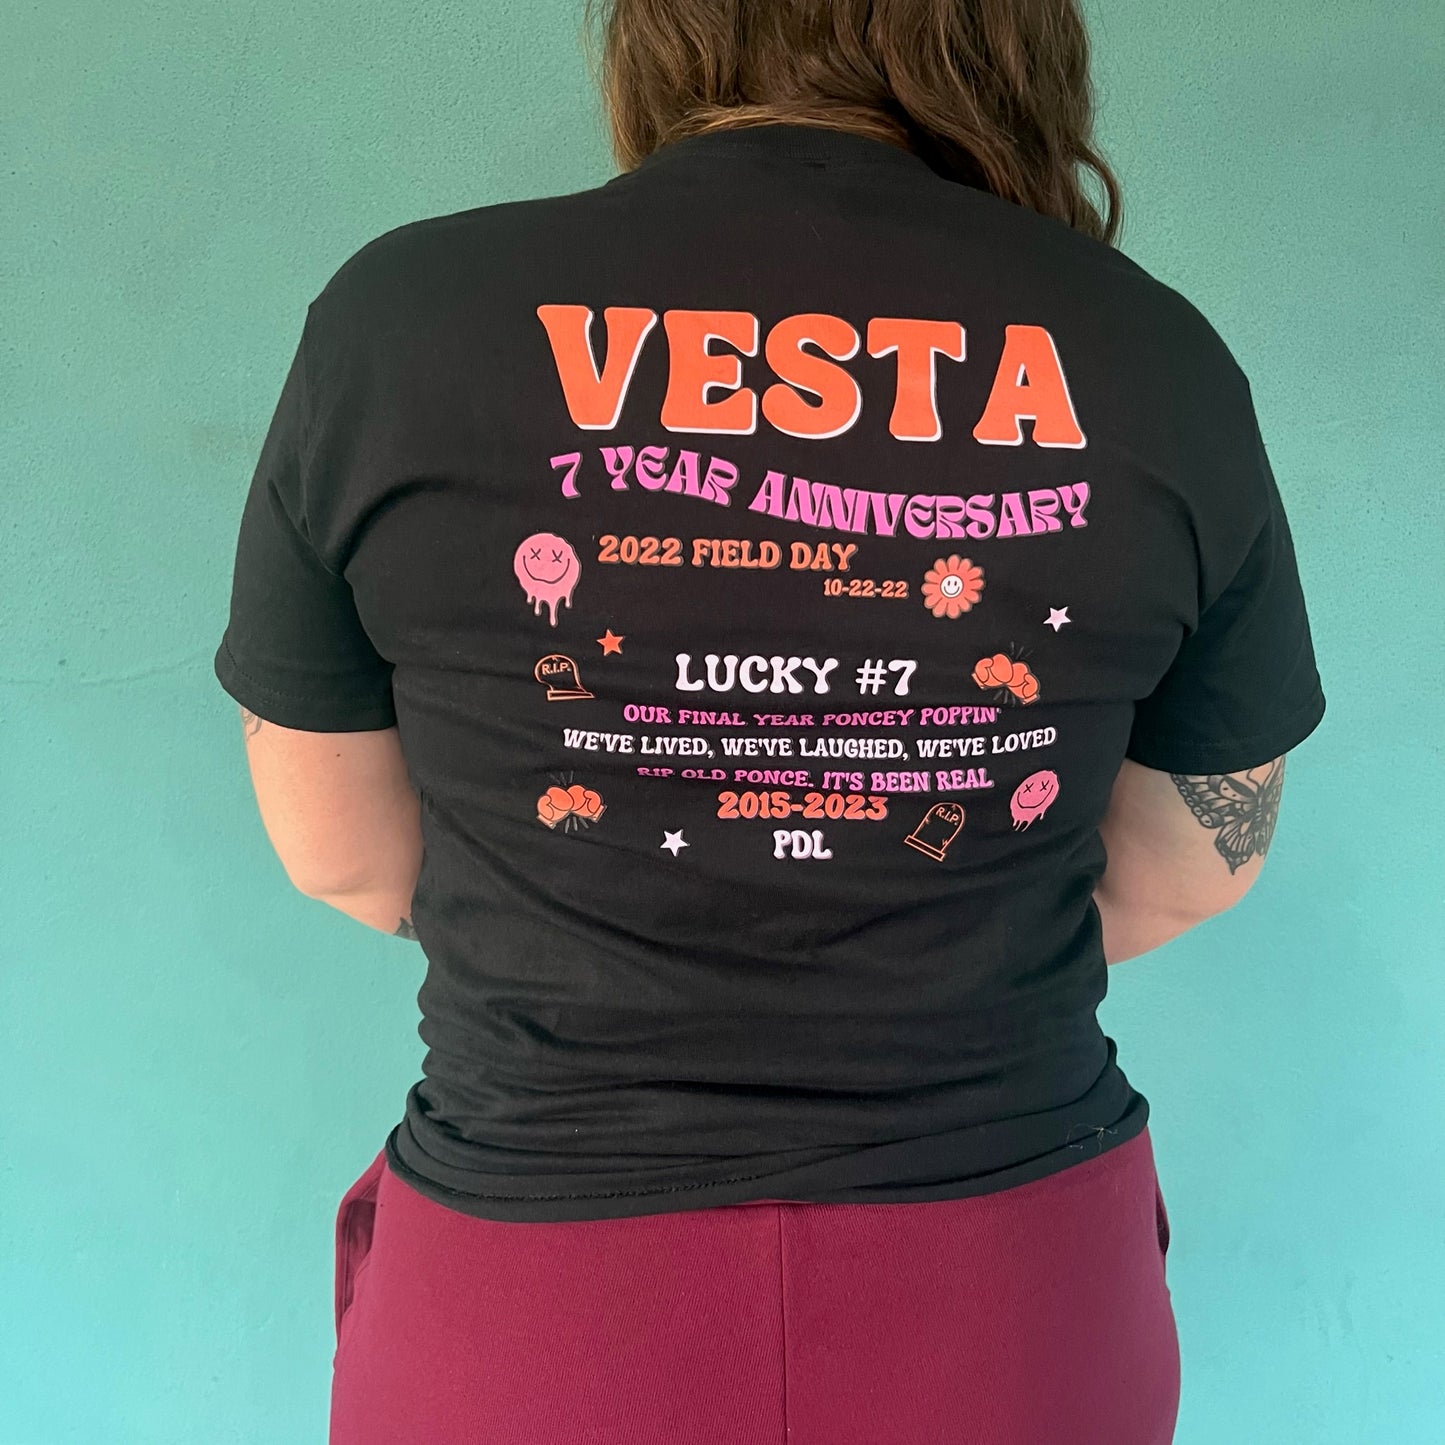 VESTA Fitboxing 7 Year Anniversary Tee - SOLD OUT!